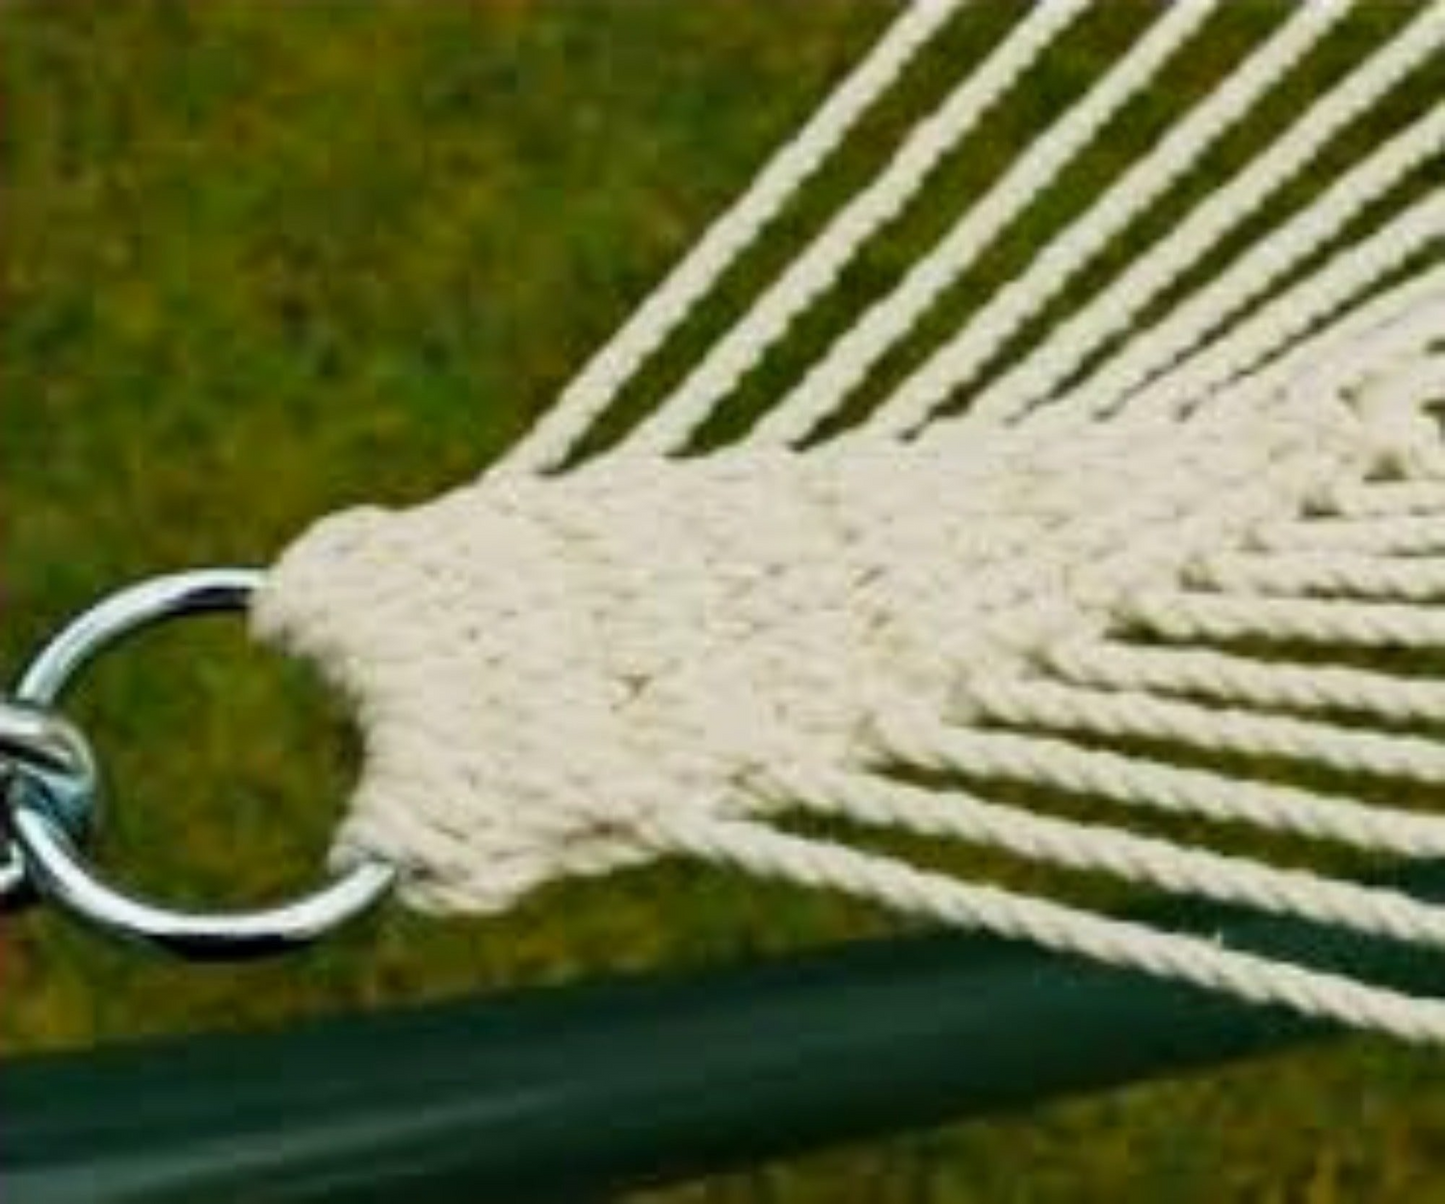 3 Ft. 8 in Wide x  11 Ft Overall Length | Polyester Rope Hammock | Single